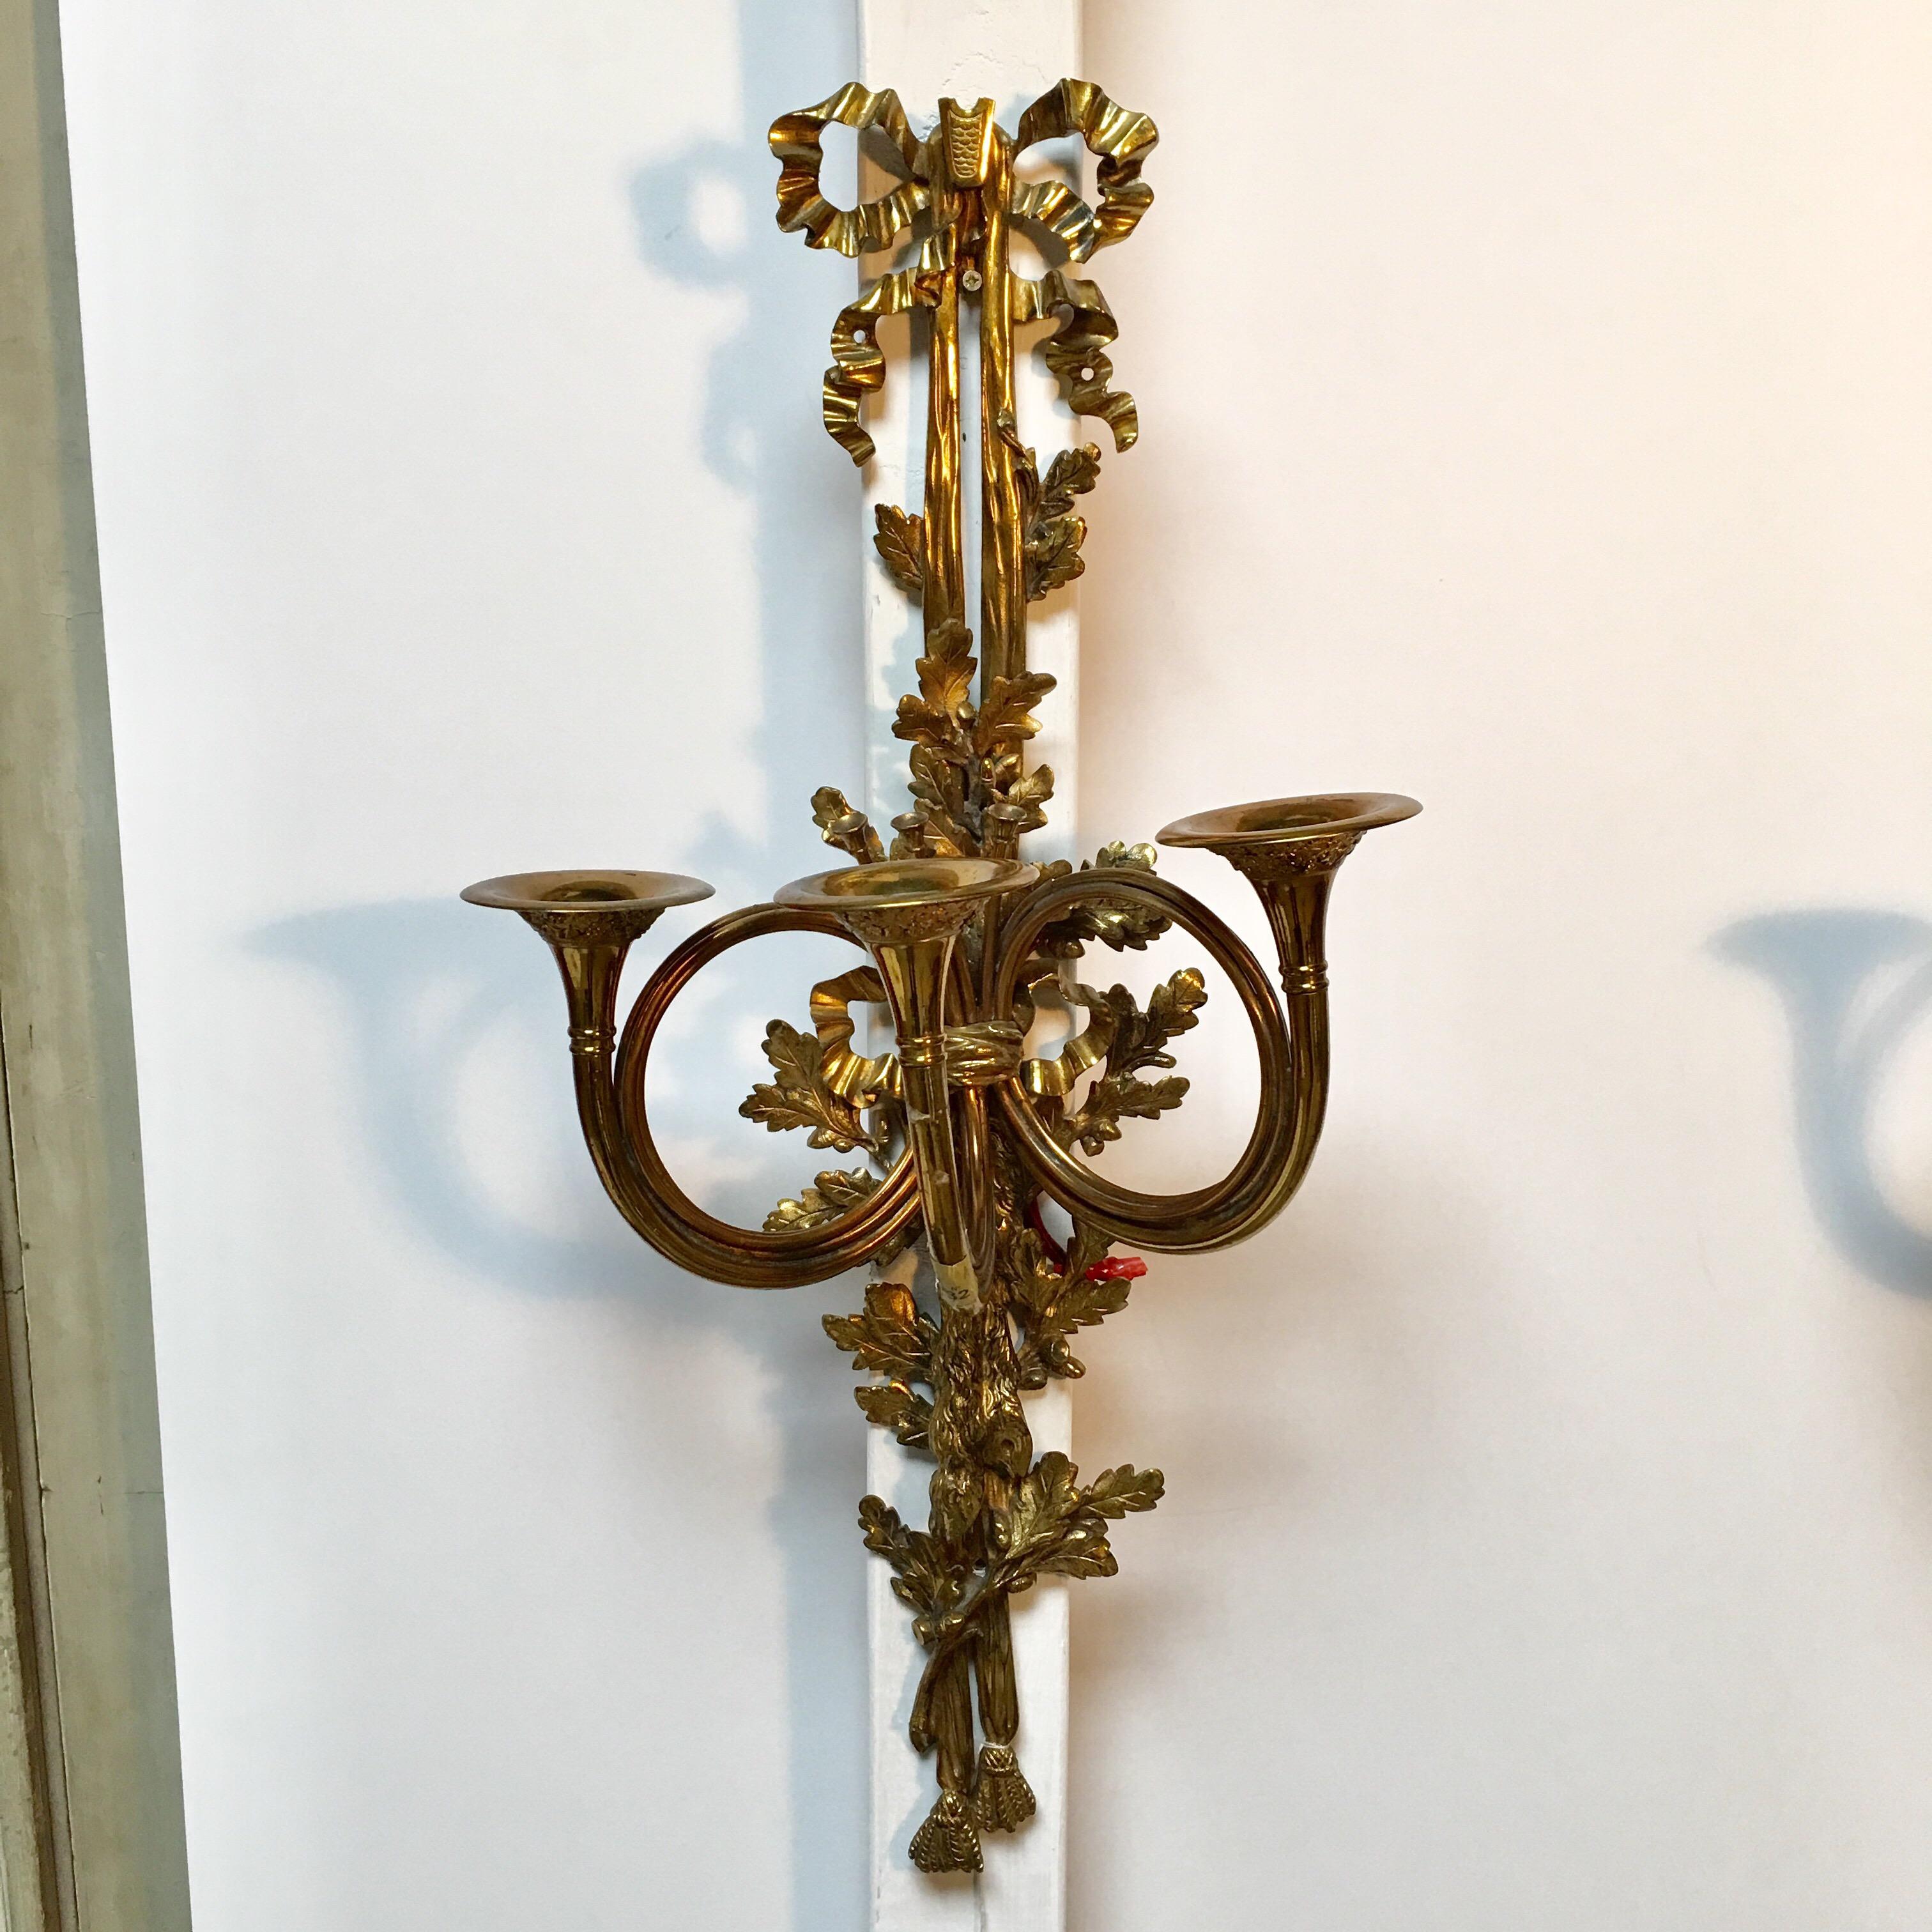 A large pair of French Louis XVI style wall sconces.